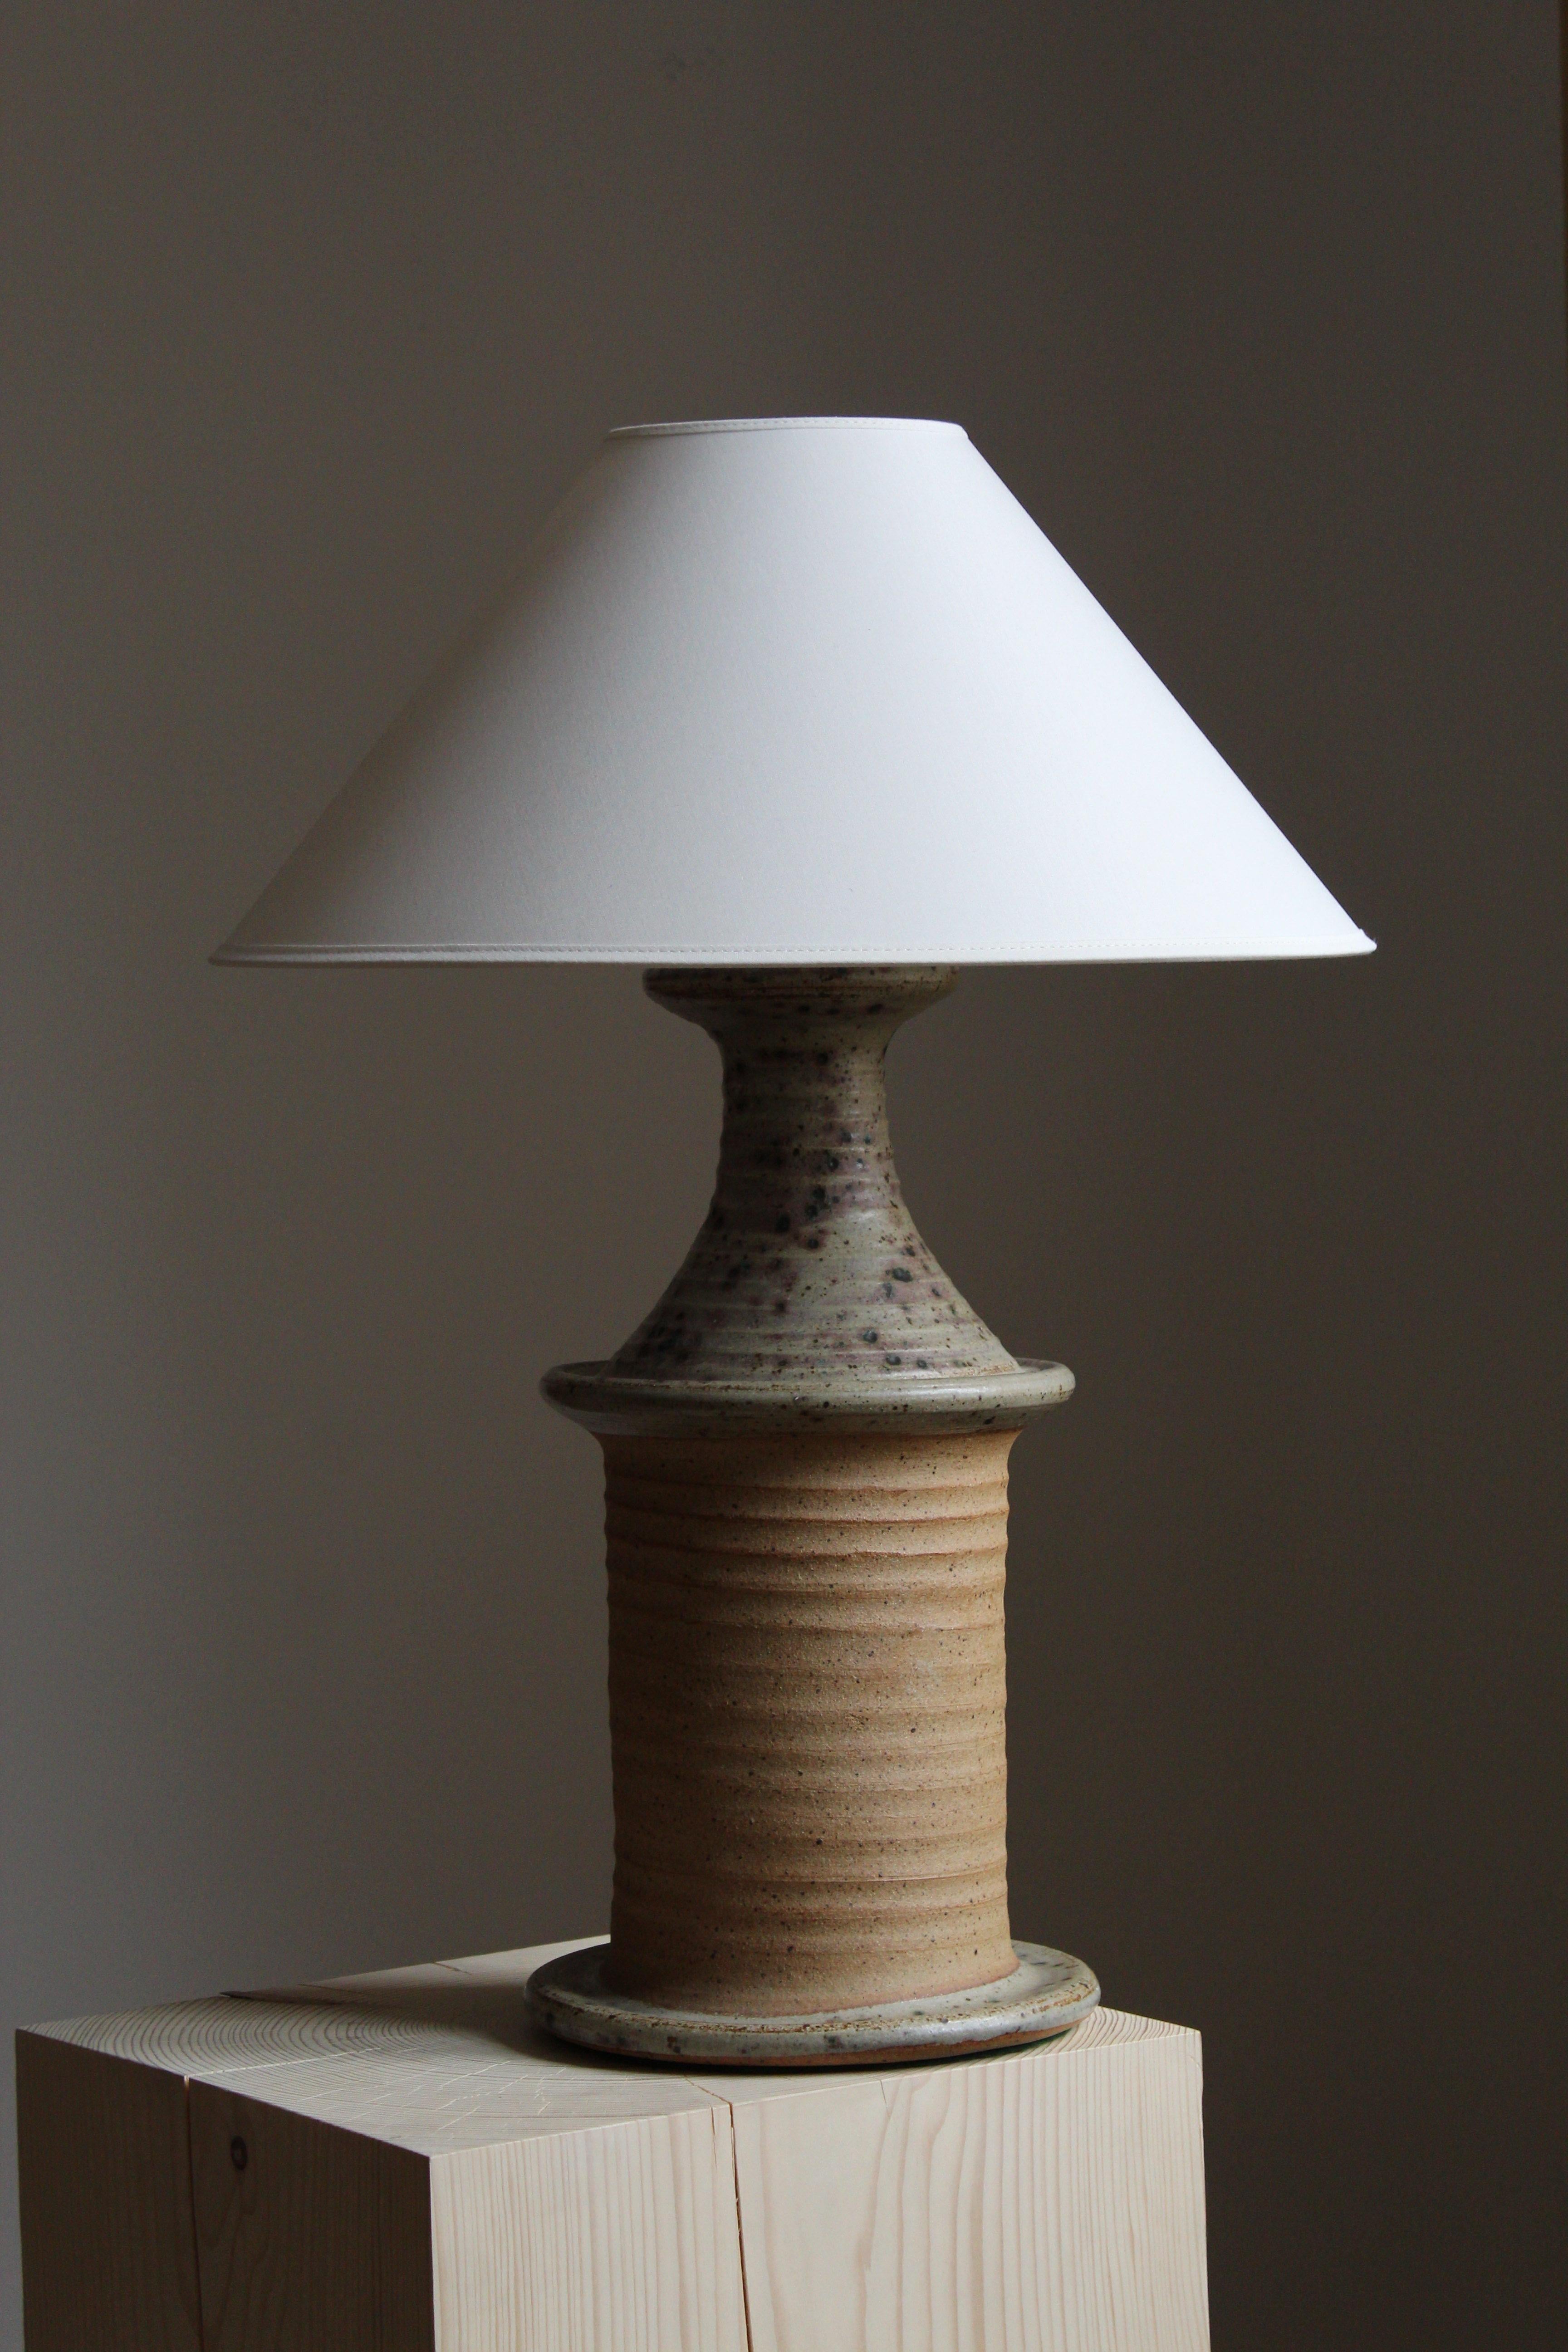 A sizable and sculptural table lamp. Produced and designed by Tue Poulsen, Denmark, 1960s. Underside of base stamped.

In grey or beige stoneware. 

Sold without lampshade. Stated dimensions exclude lampshade.

Other designers of the period